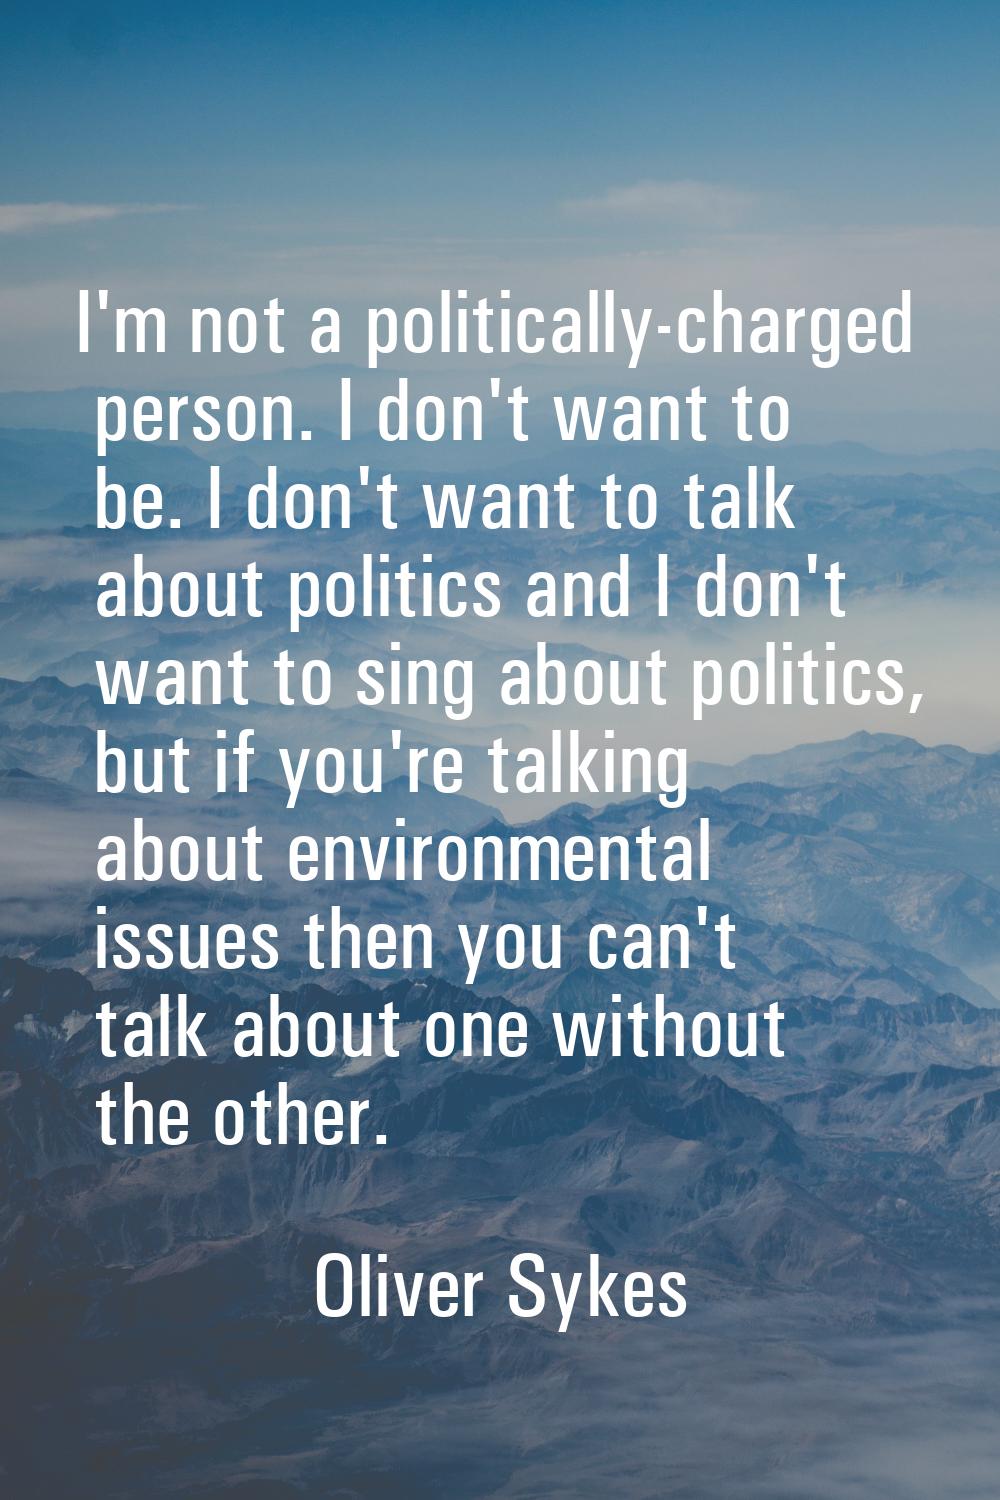 I'm not a politically-charged person. I don't want to be. I don't want to talk about politics and I